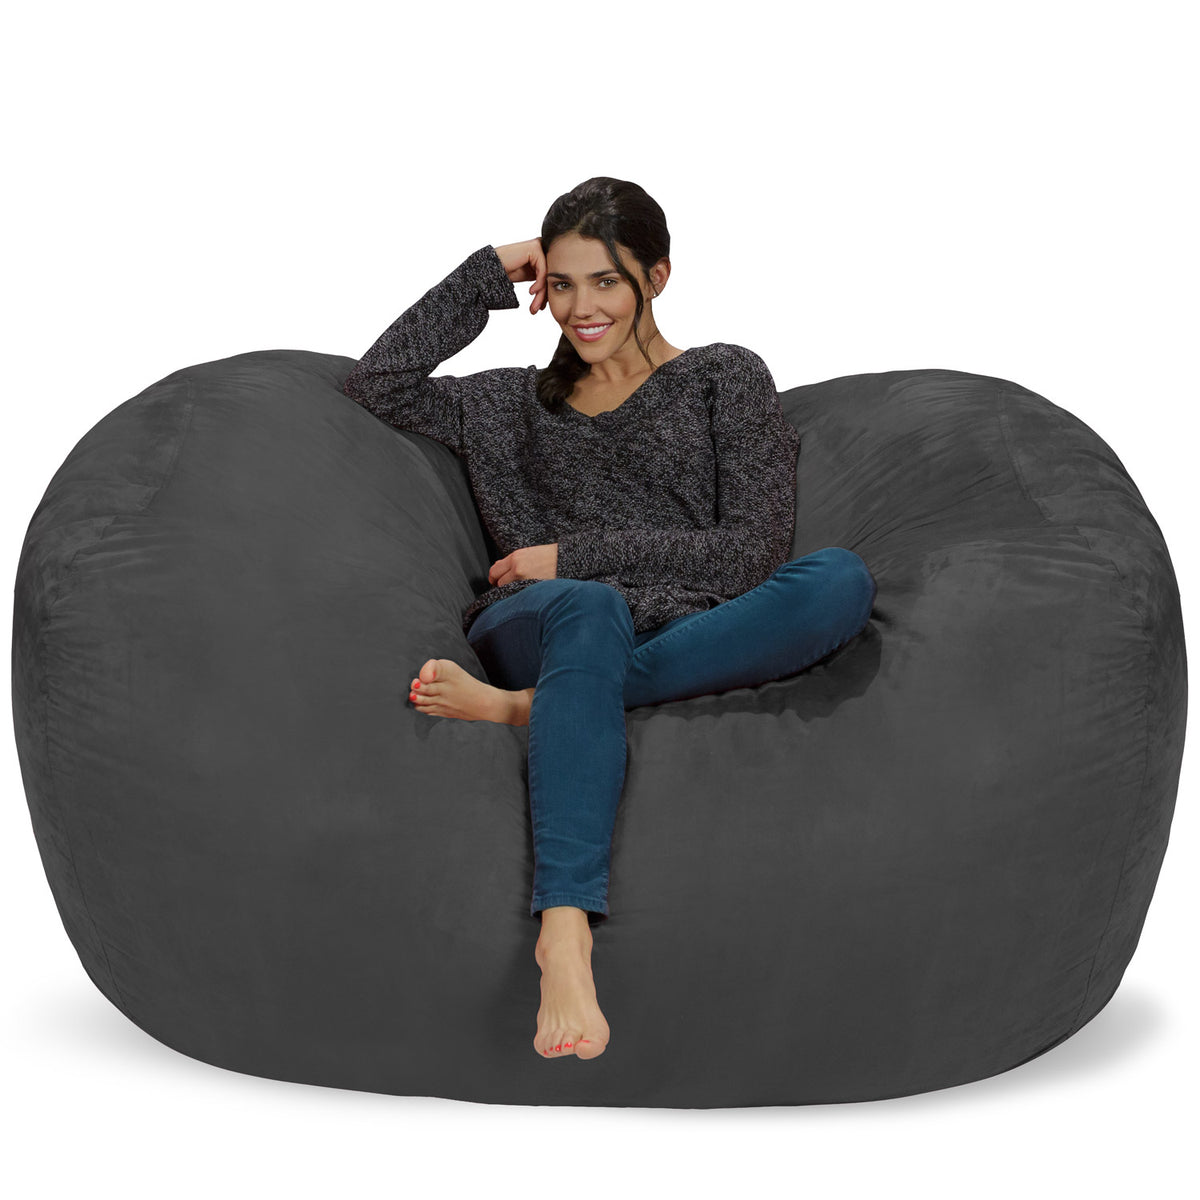 Chill Sack Bean Bag Chair, Memory Foam with Ultra Fur Cover, Kids, Adults,  6 ft, Ultra Fur Red